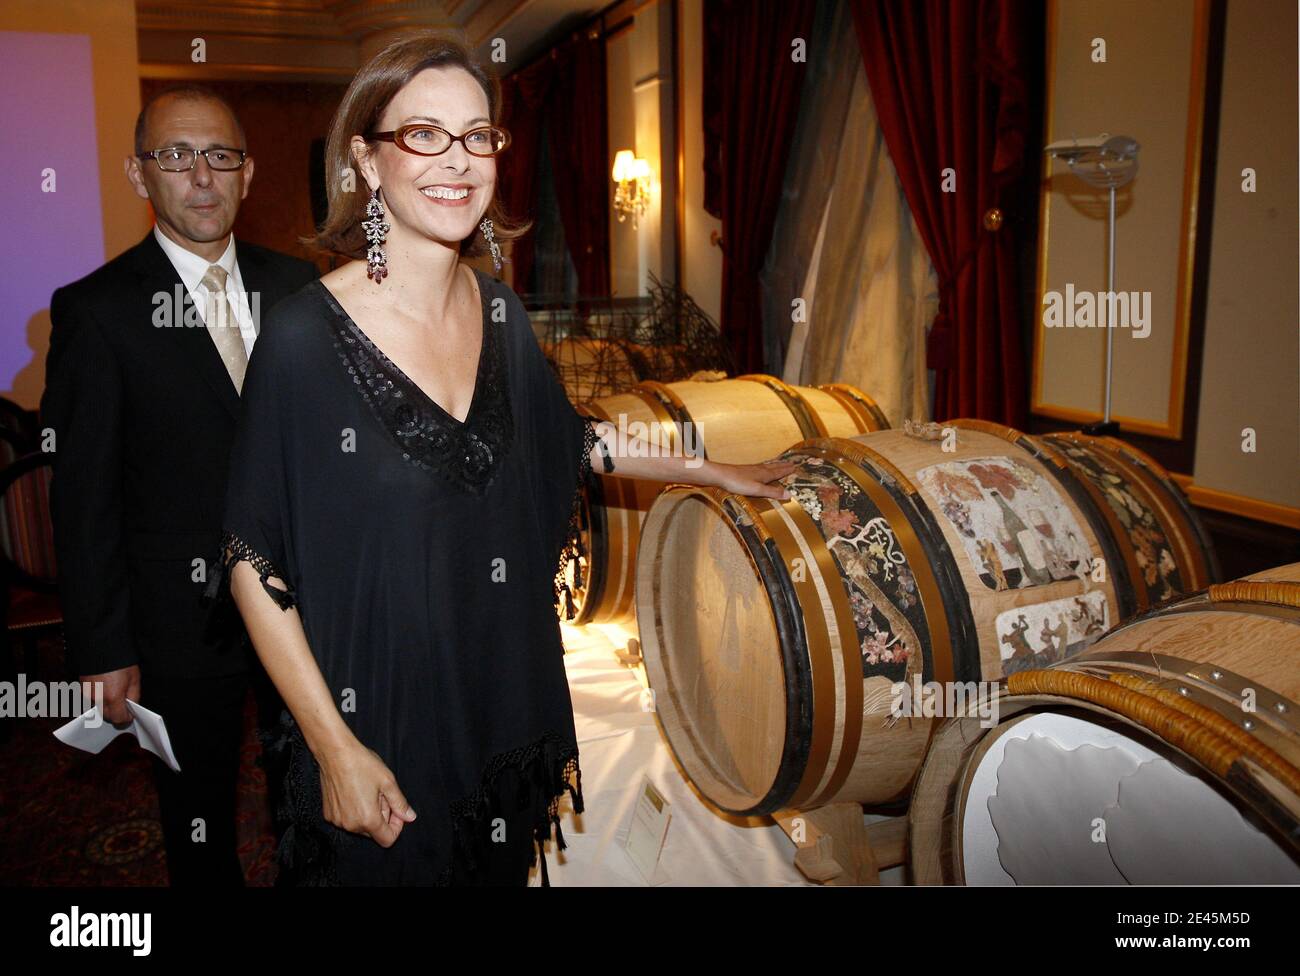 French Actress Carole Bouquet attends an wine auction to benefit charity association 'La voix de l'enfant' (The Child's Voice), in Bordeaux, southwestern France on June 2, 2009. Ten barrels manufactured from a 340-year-old oak and personalized by artists have been auctioned. Bouquet is the association's spokesperson. Photo by Patrick Bernard/ABACAPRESS.COM Stock Photo